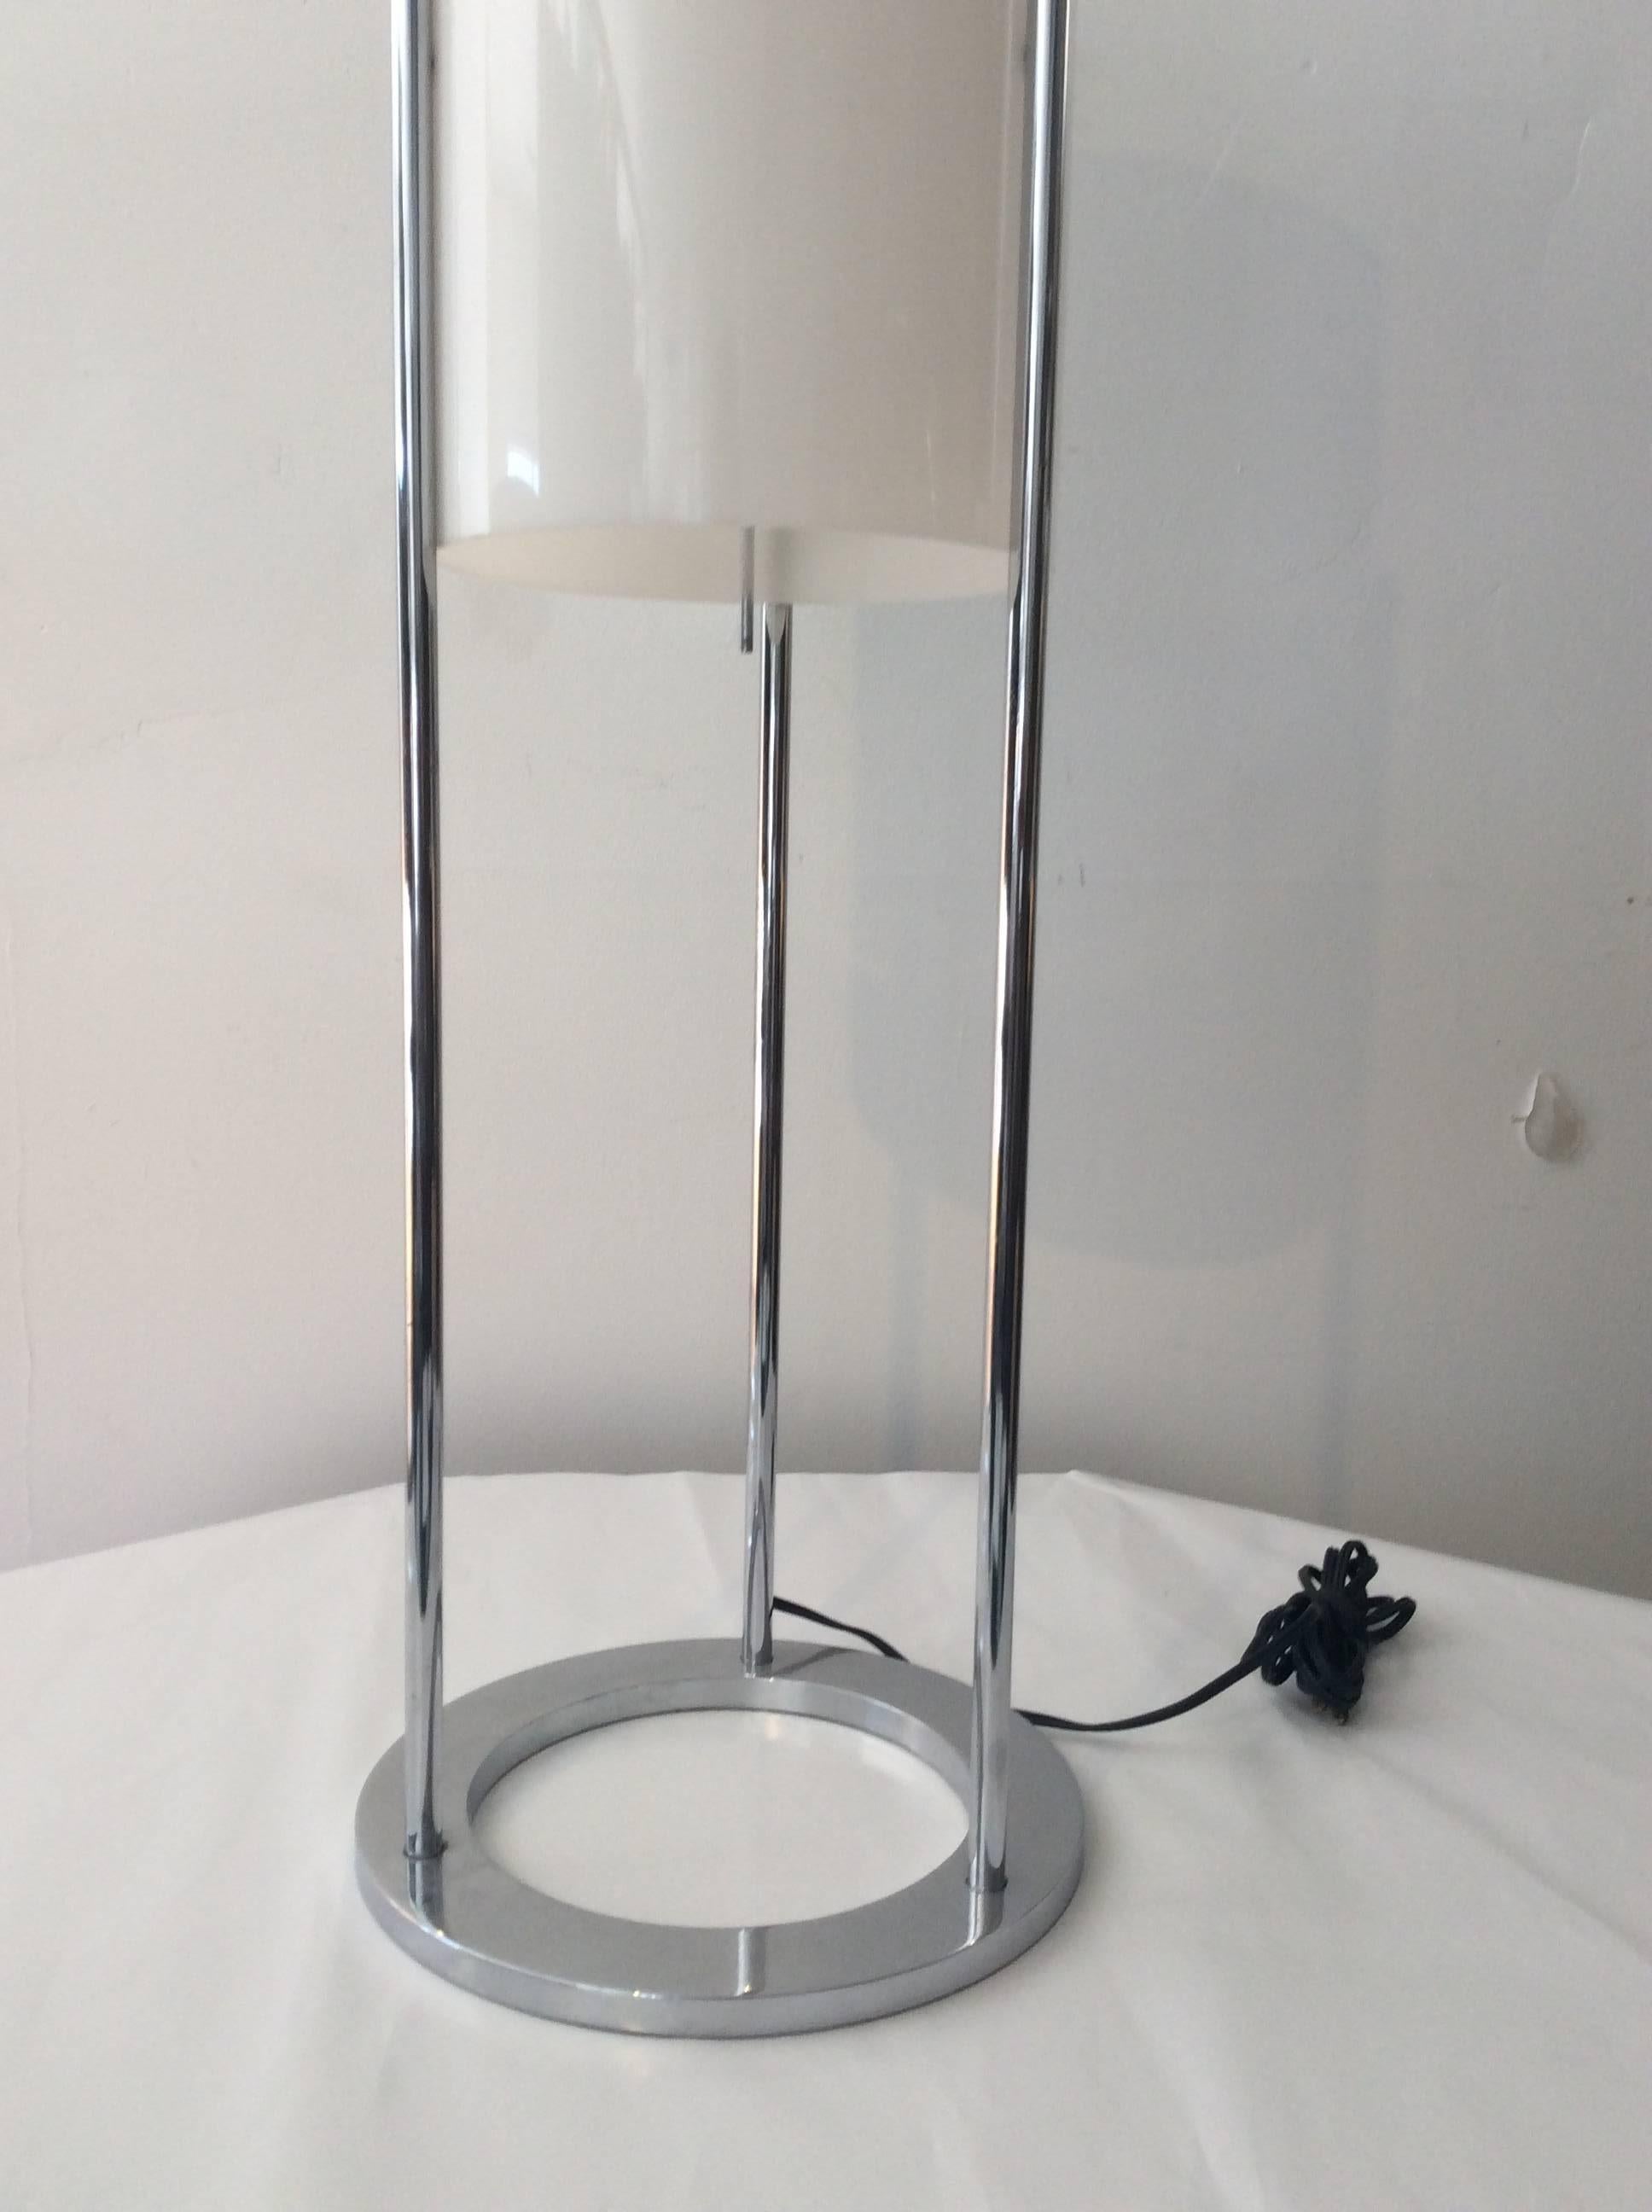 You are looking at a very modern lamp designed by Paul Mayen for Habitat . It is constructed of metal with a chrome-plated fin. The diffuser is made of white acrylic. Lamp has a cylindrical design. The on/ off pull chain is also chrome fin. The